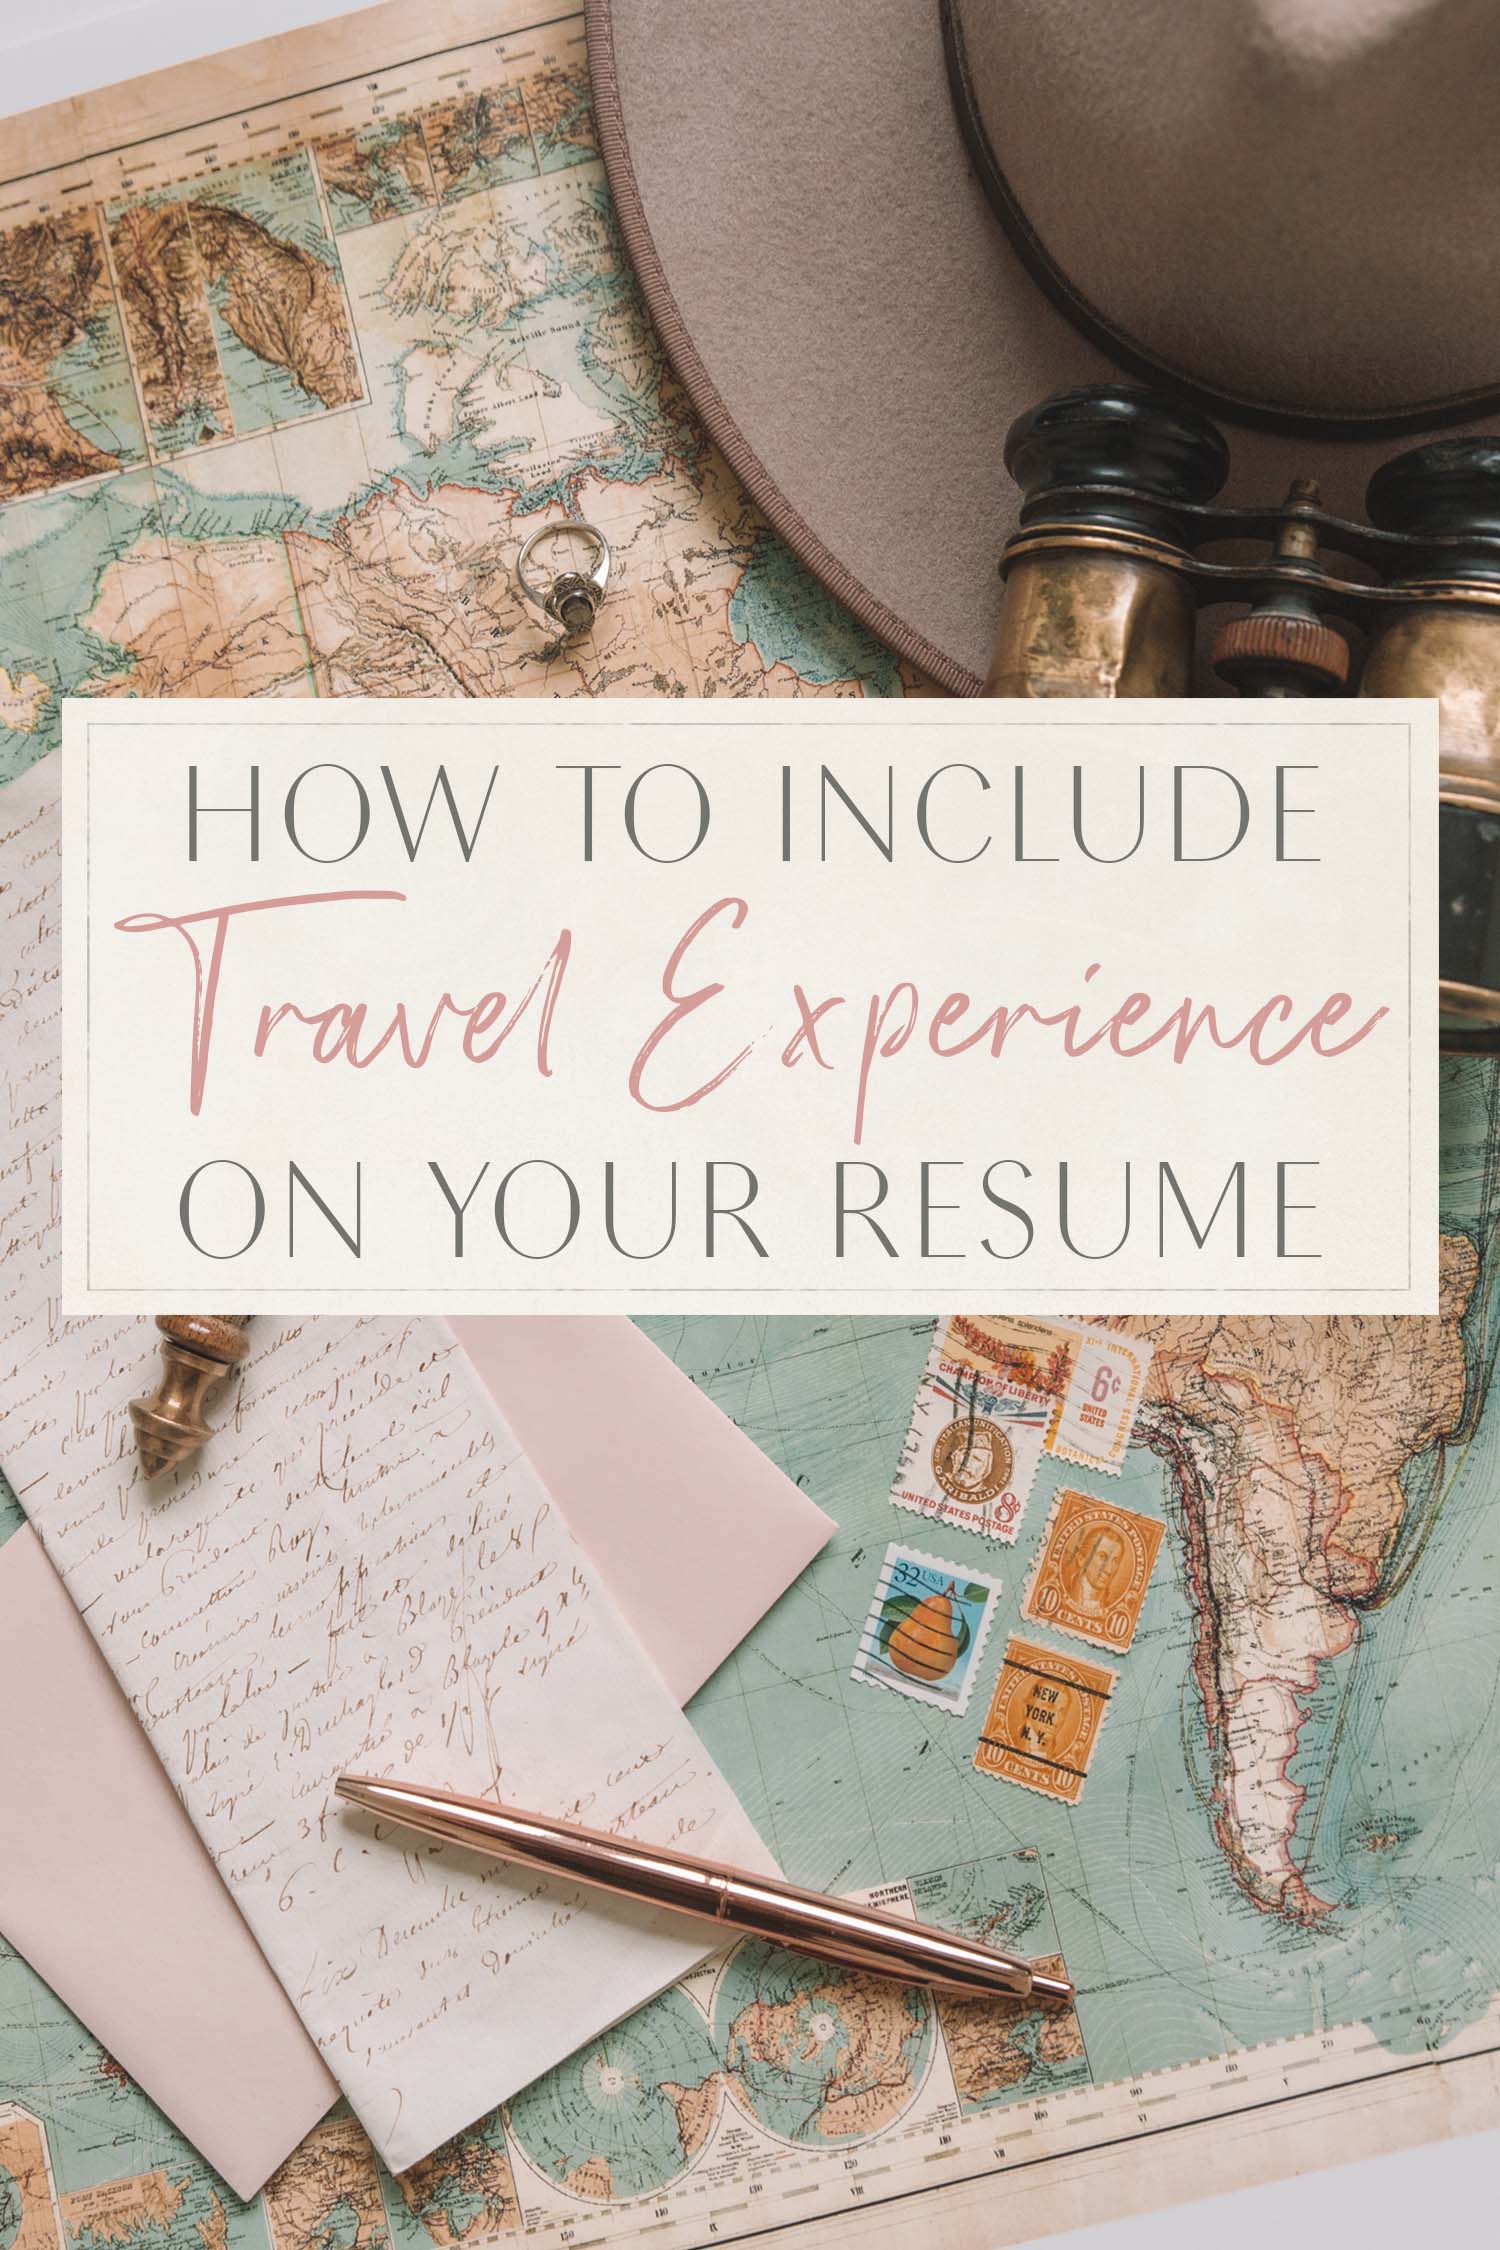 How to Include Travel on Your Resume